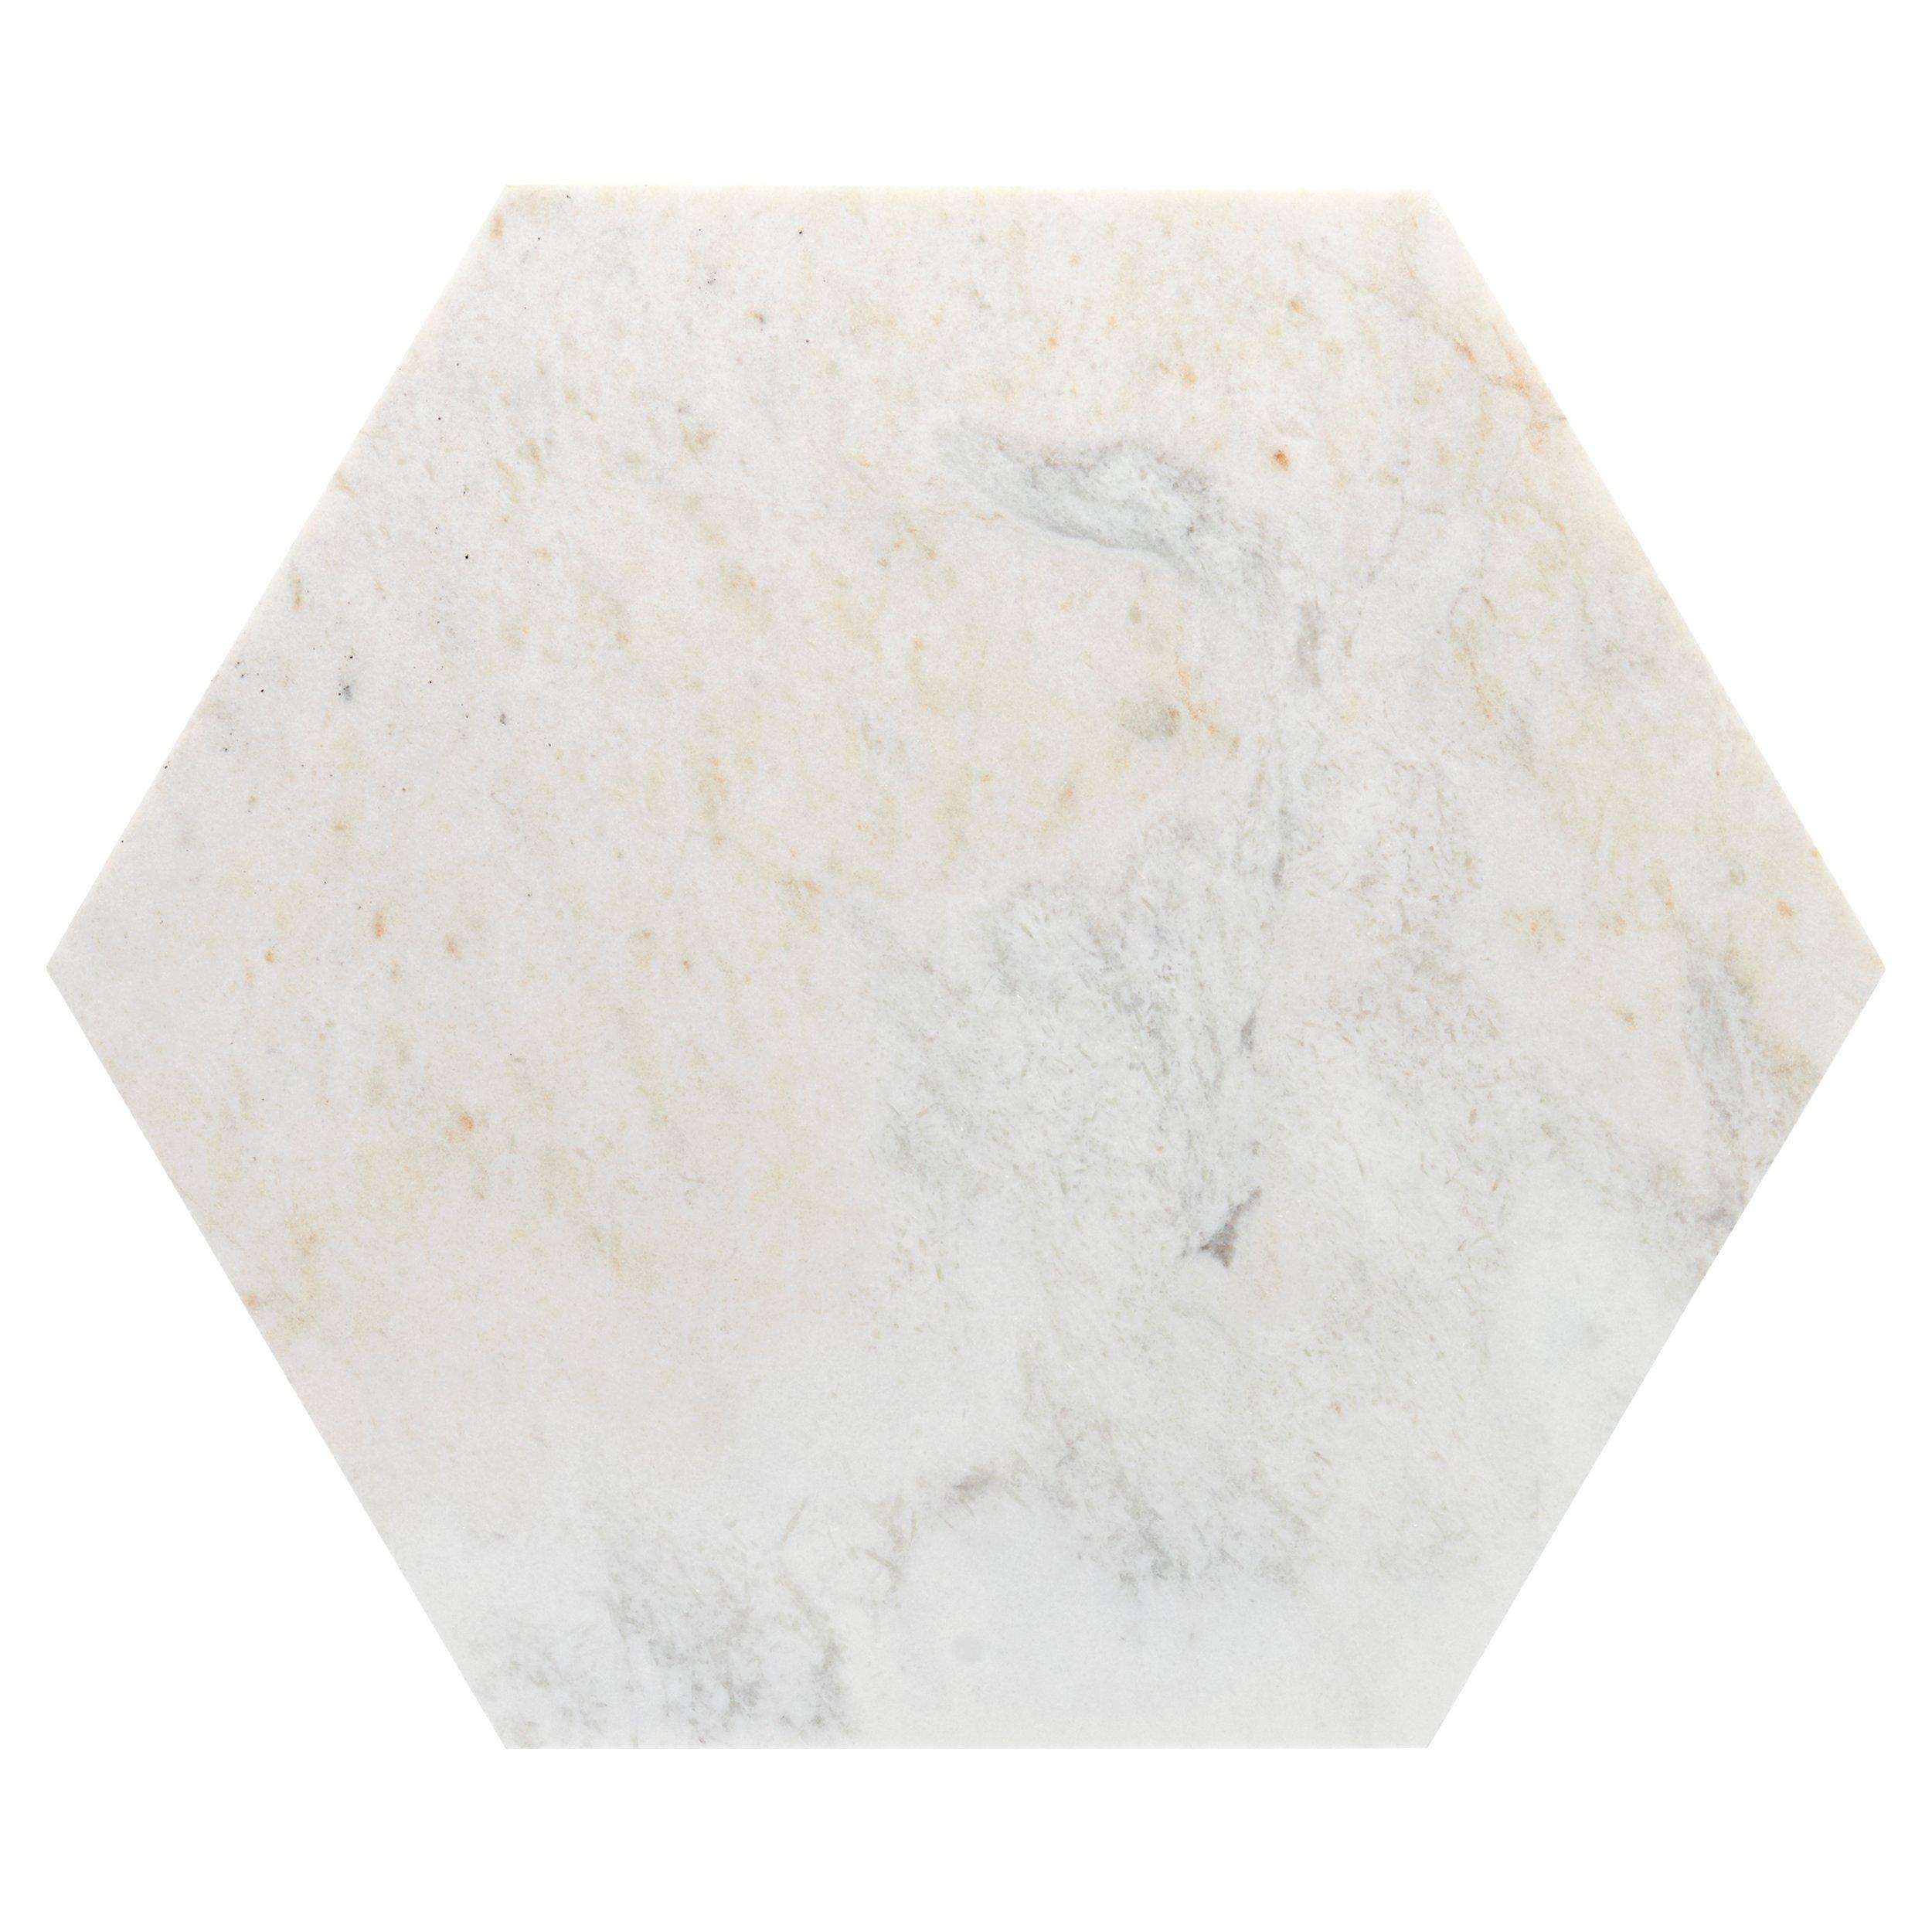 Bianco Orion 18 in Hexagon Polished Marble Tile